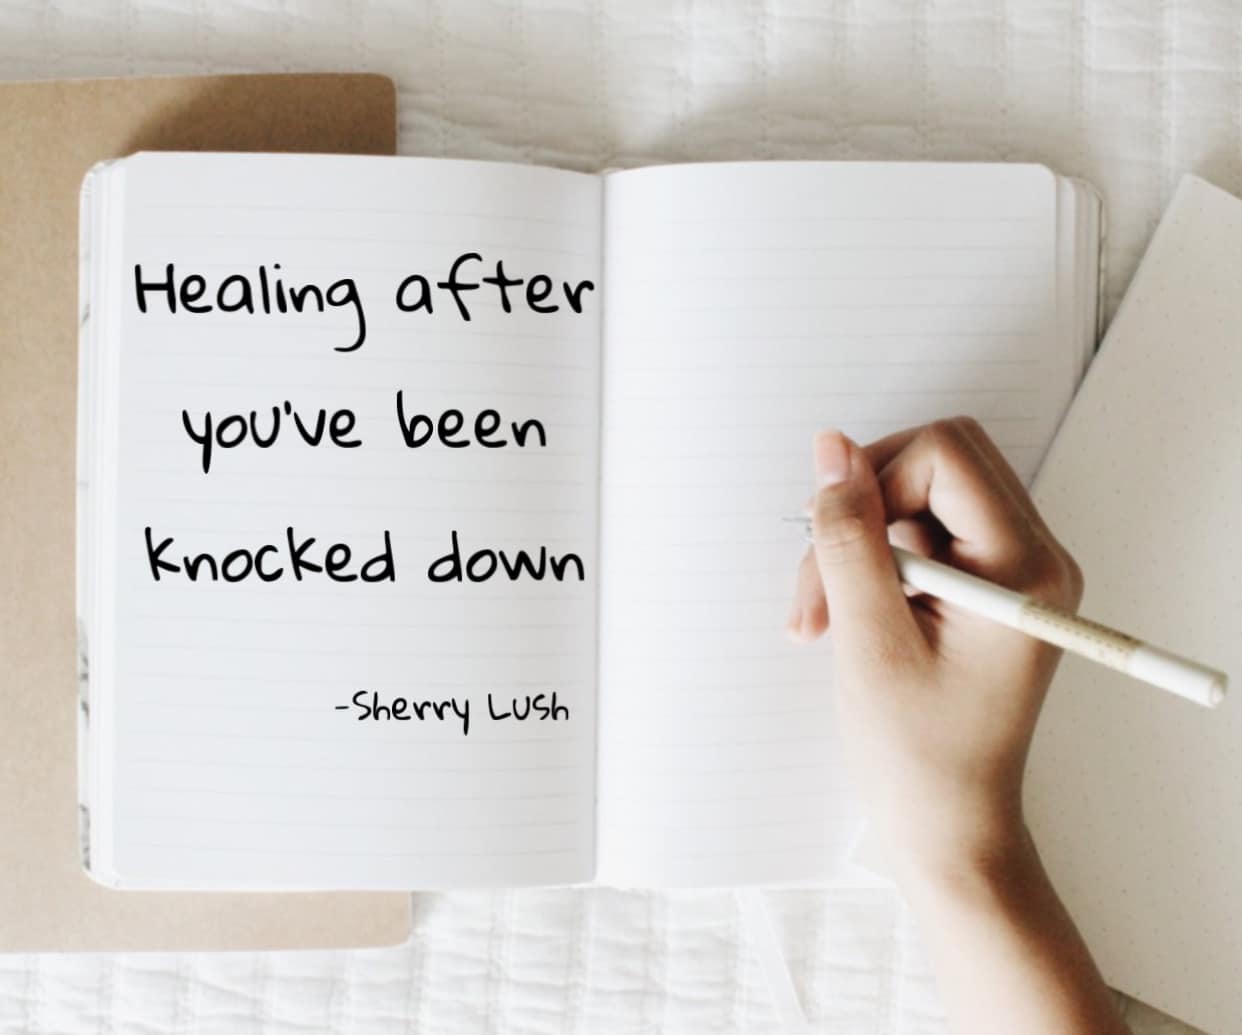 Read more: Healing After You Have Been Knocked Down - by Sherry Lush